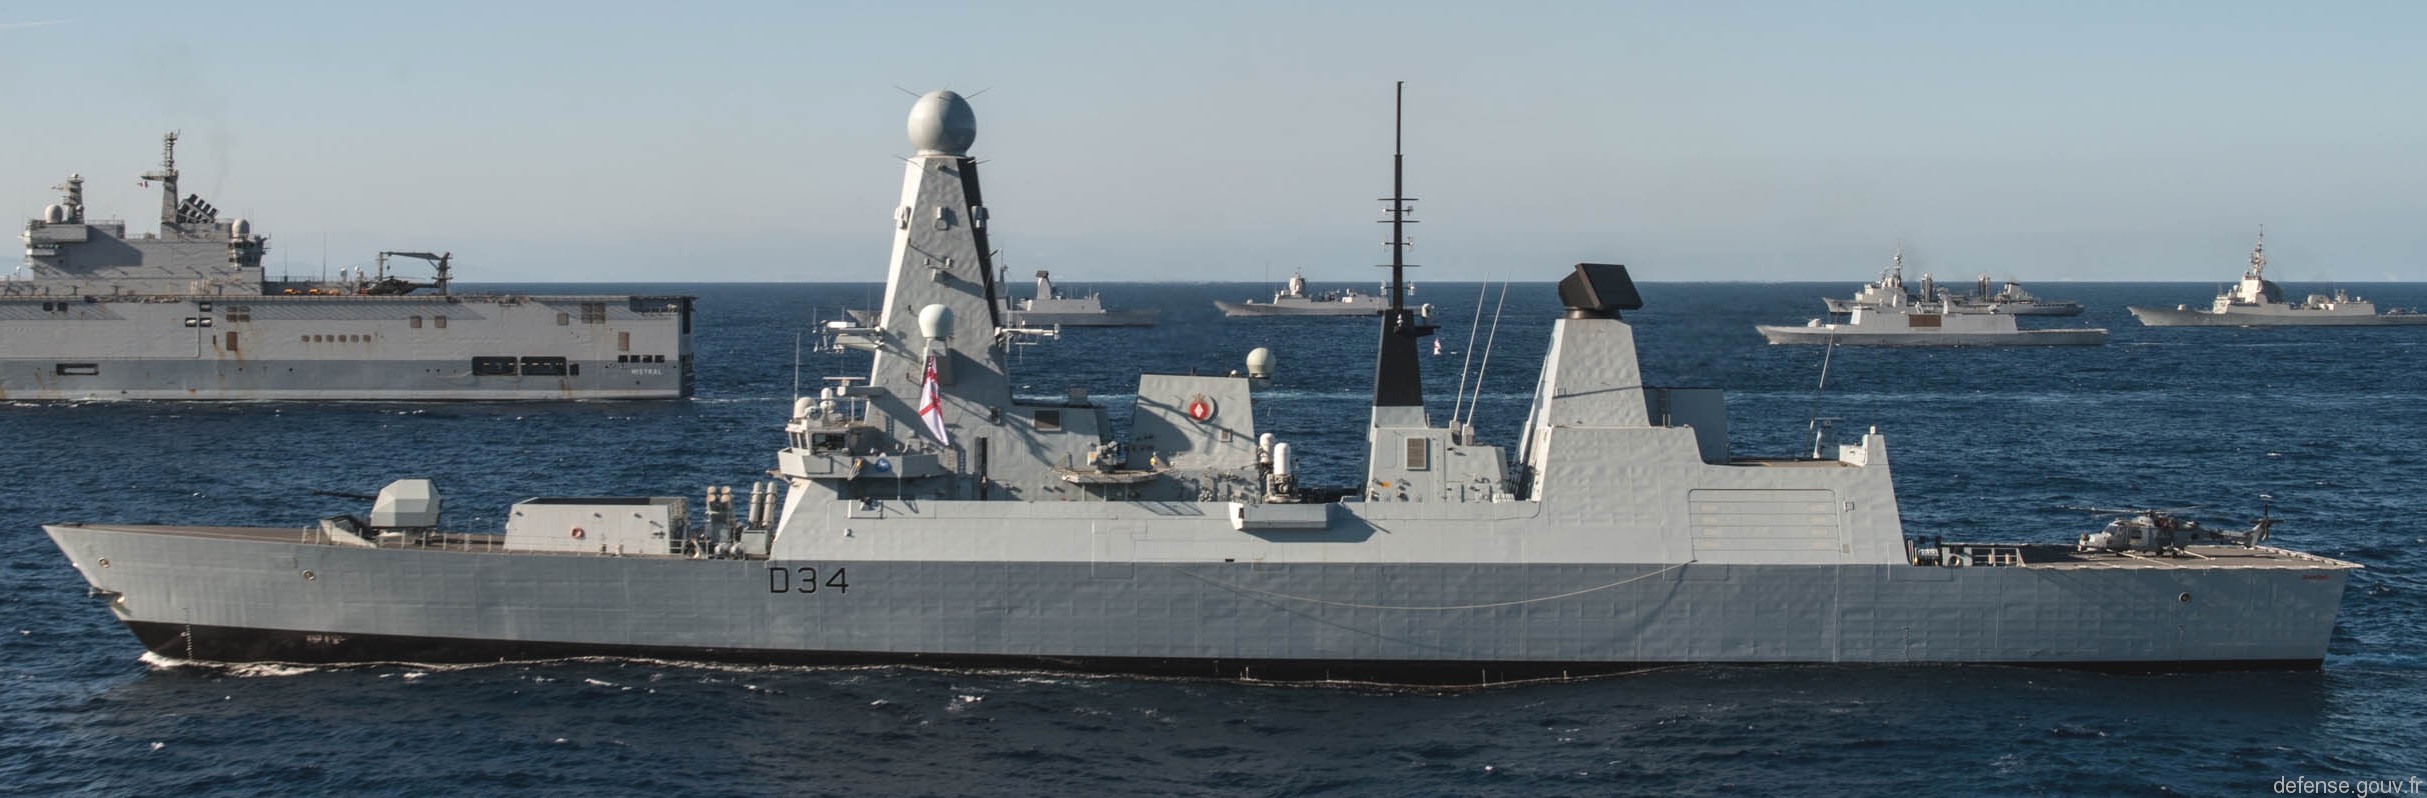 hms diamond d-34 type 45 daring class guided missile destroyer ddg royal navy sea viper paams 39